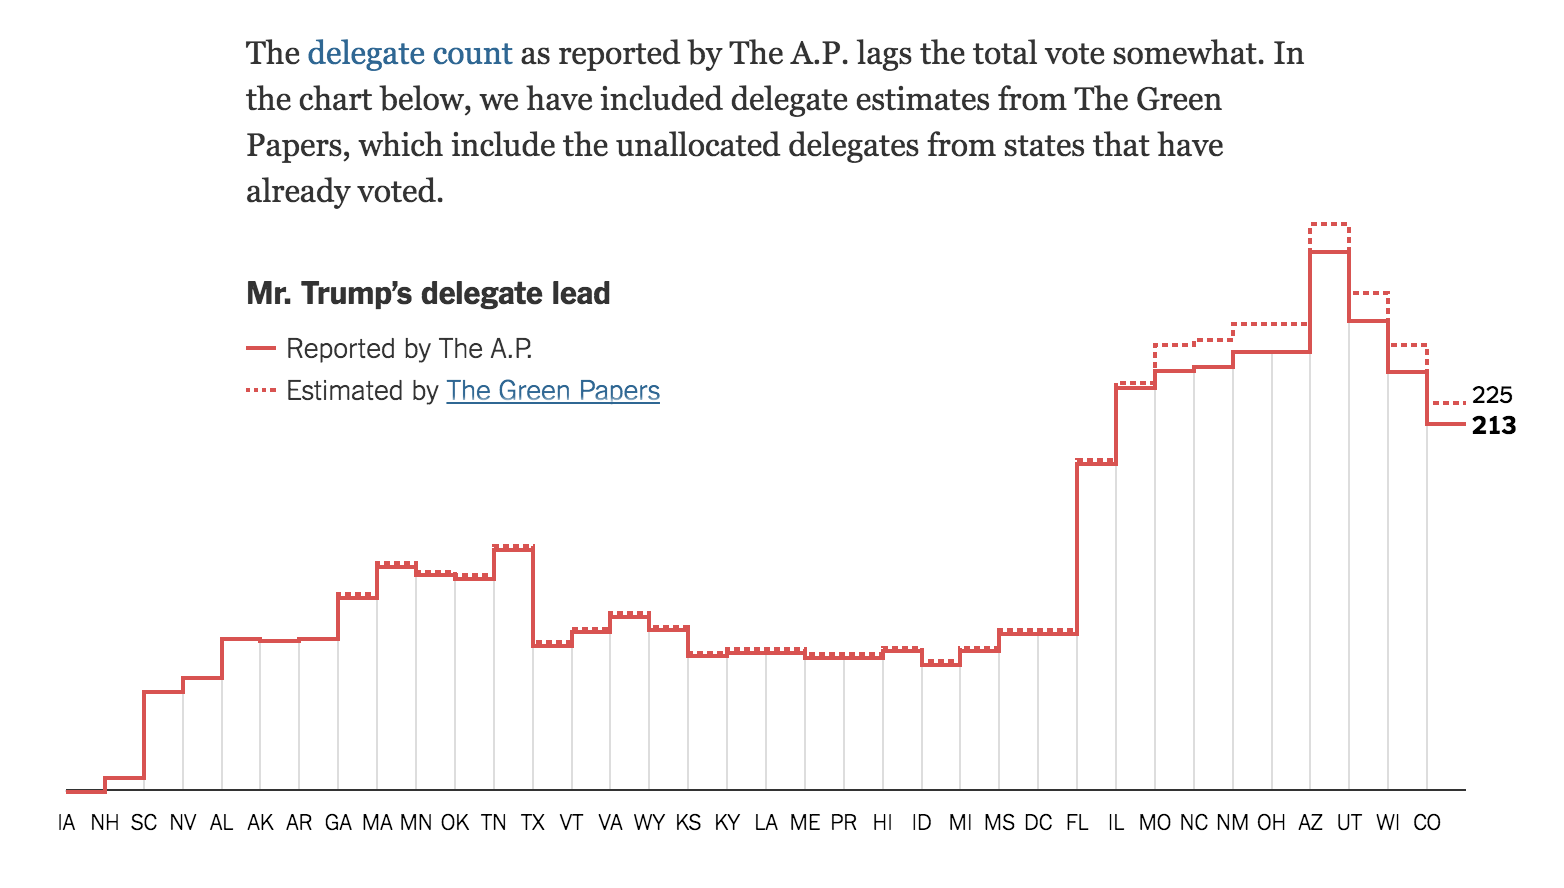 How the Rest of the Delegate Race Could Unfold